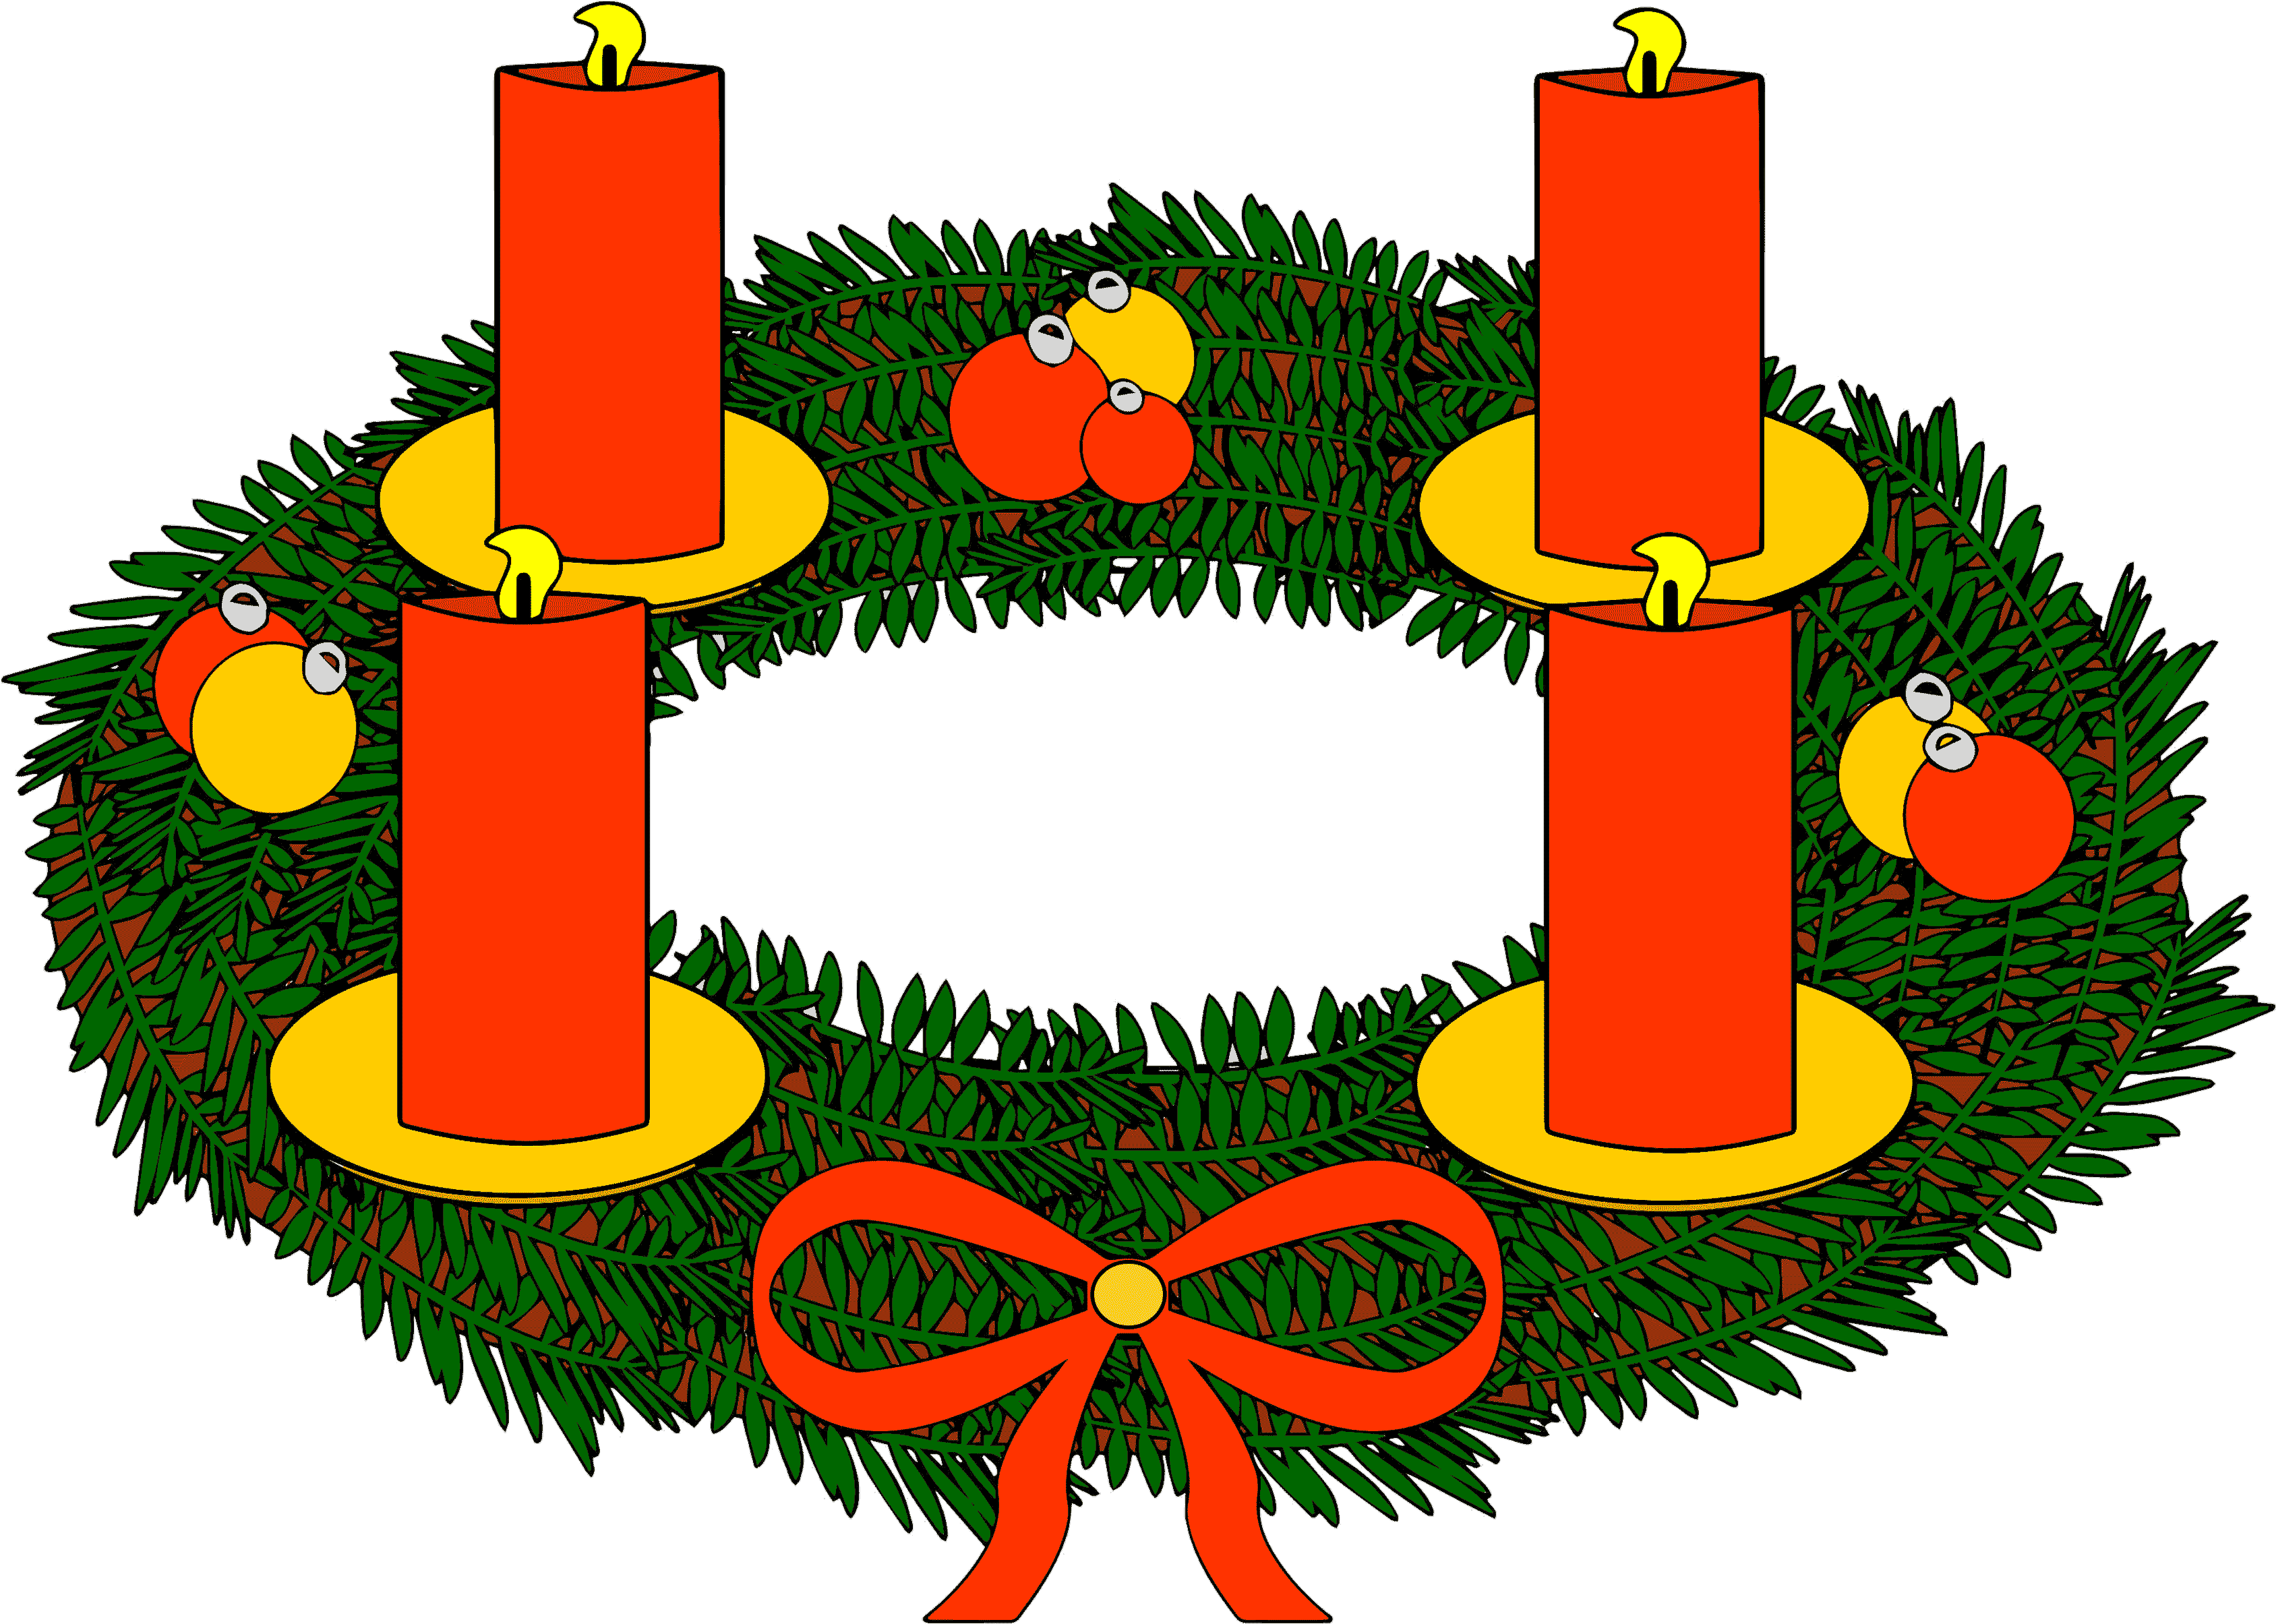 Banner Royalty Free Download Advent Wreath Clipart.